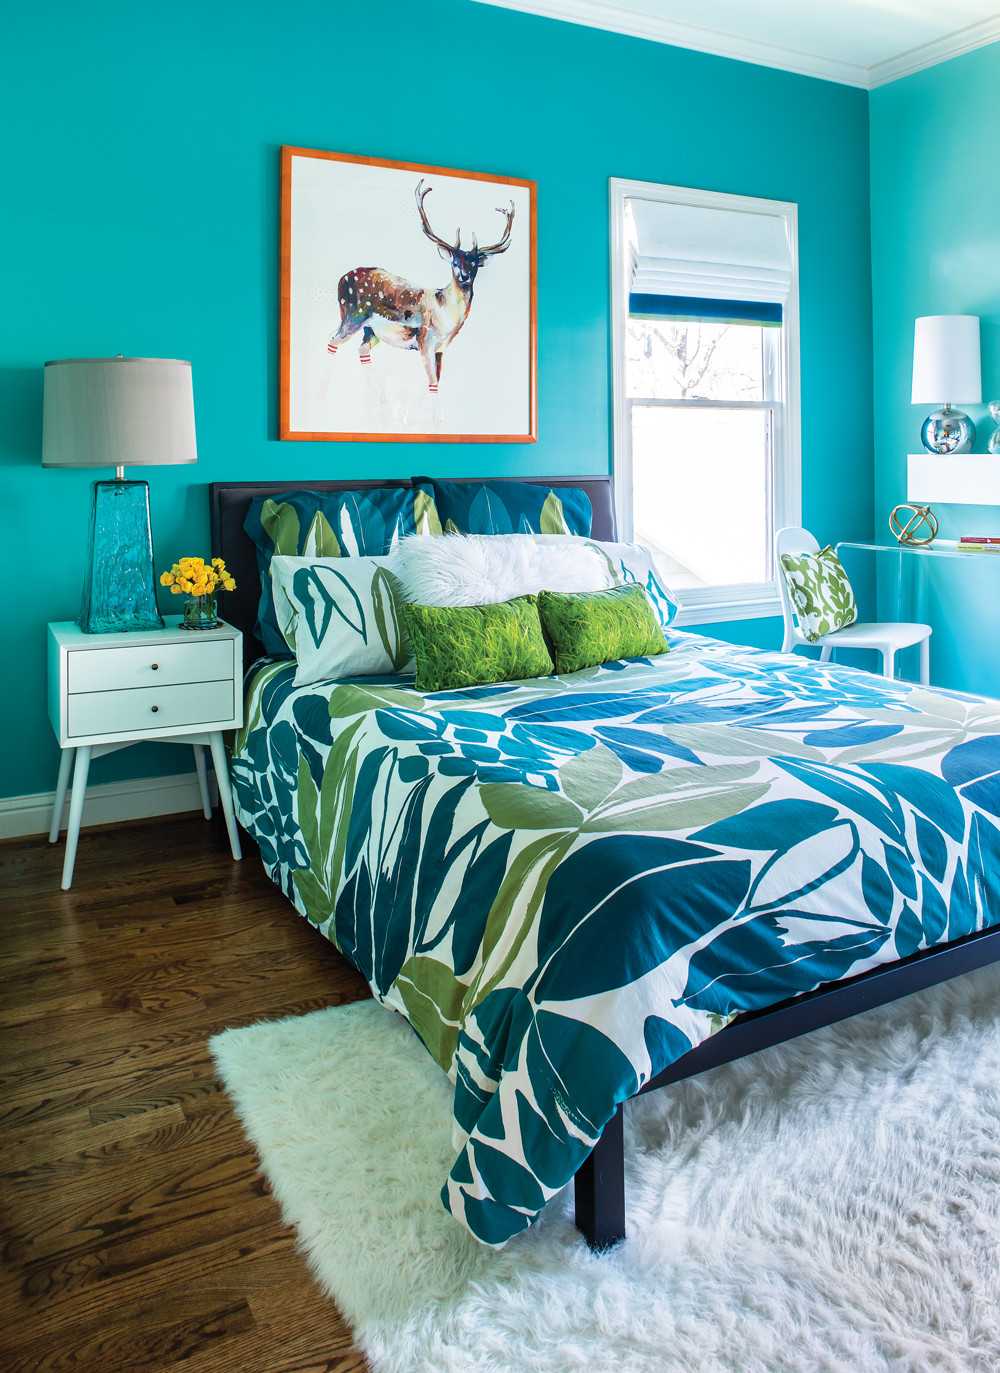 Turquoise Bedroom Decor
 Room Envy This bright turquoise bedroom is a teen dream